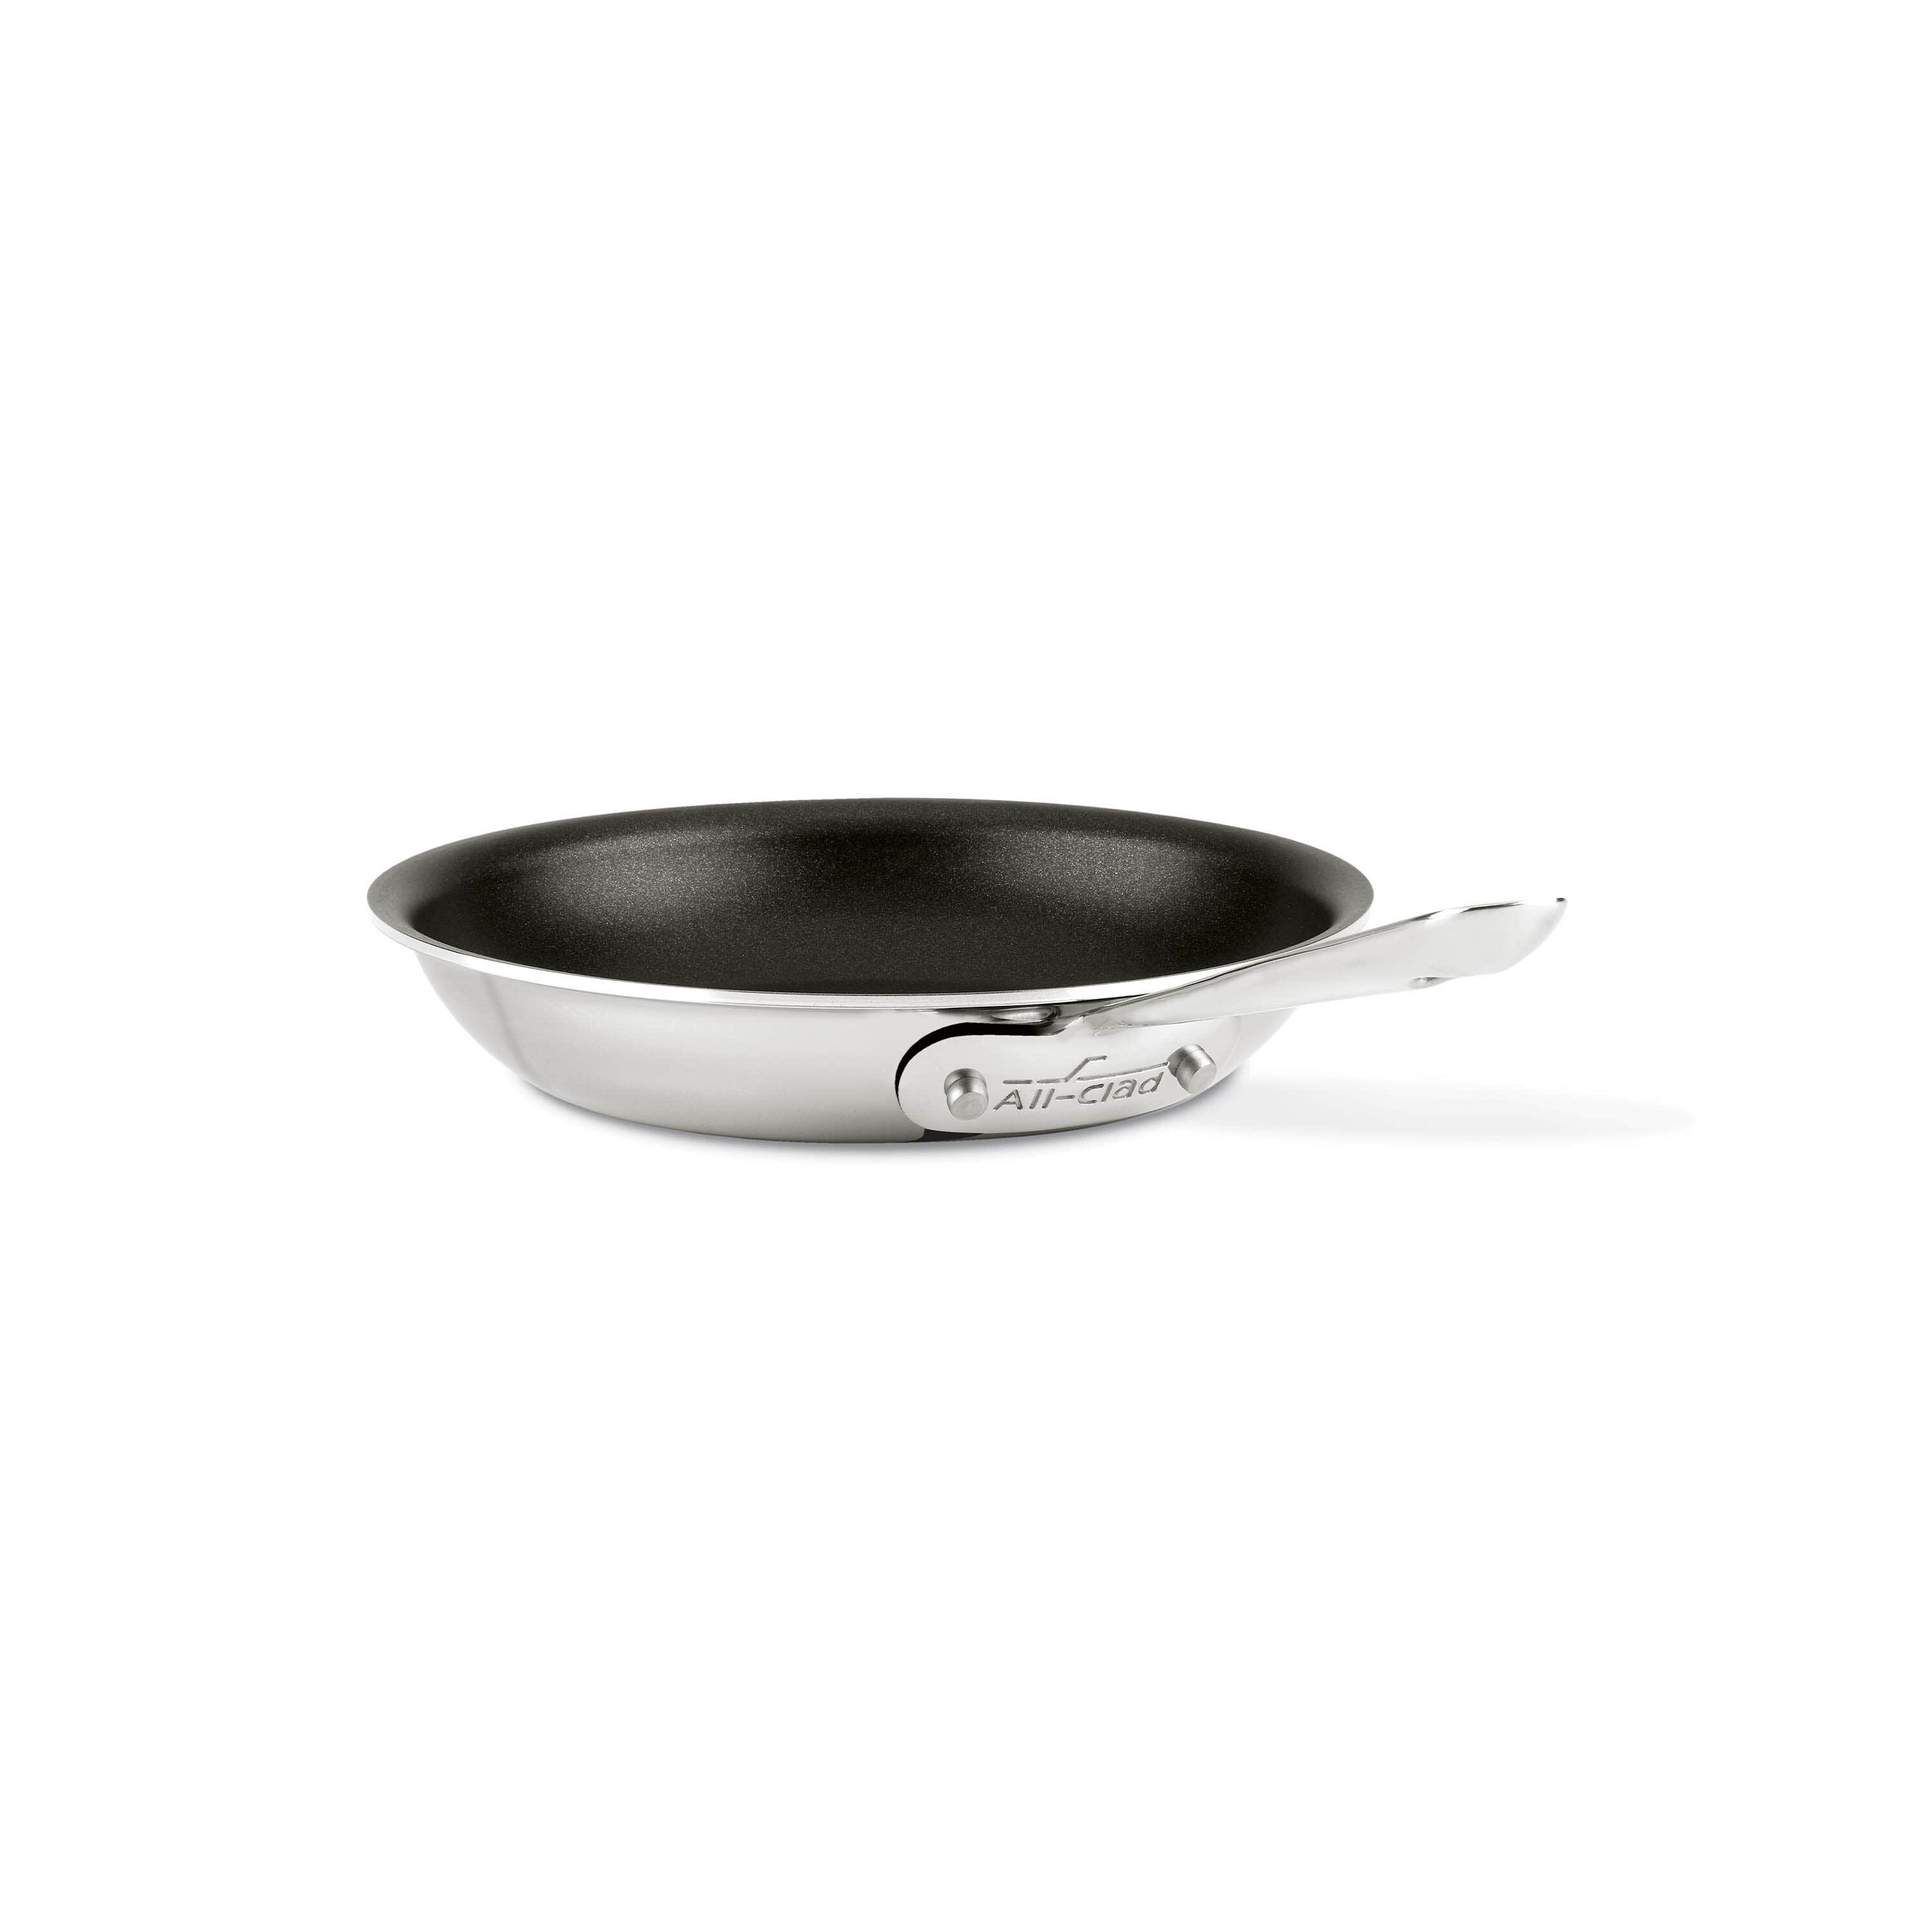 All-Clad All-Clad Metalcrafters Stainless Steel 9 inch Skillet Used 